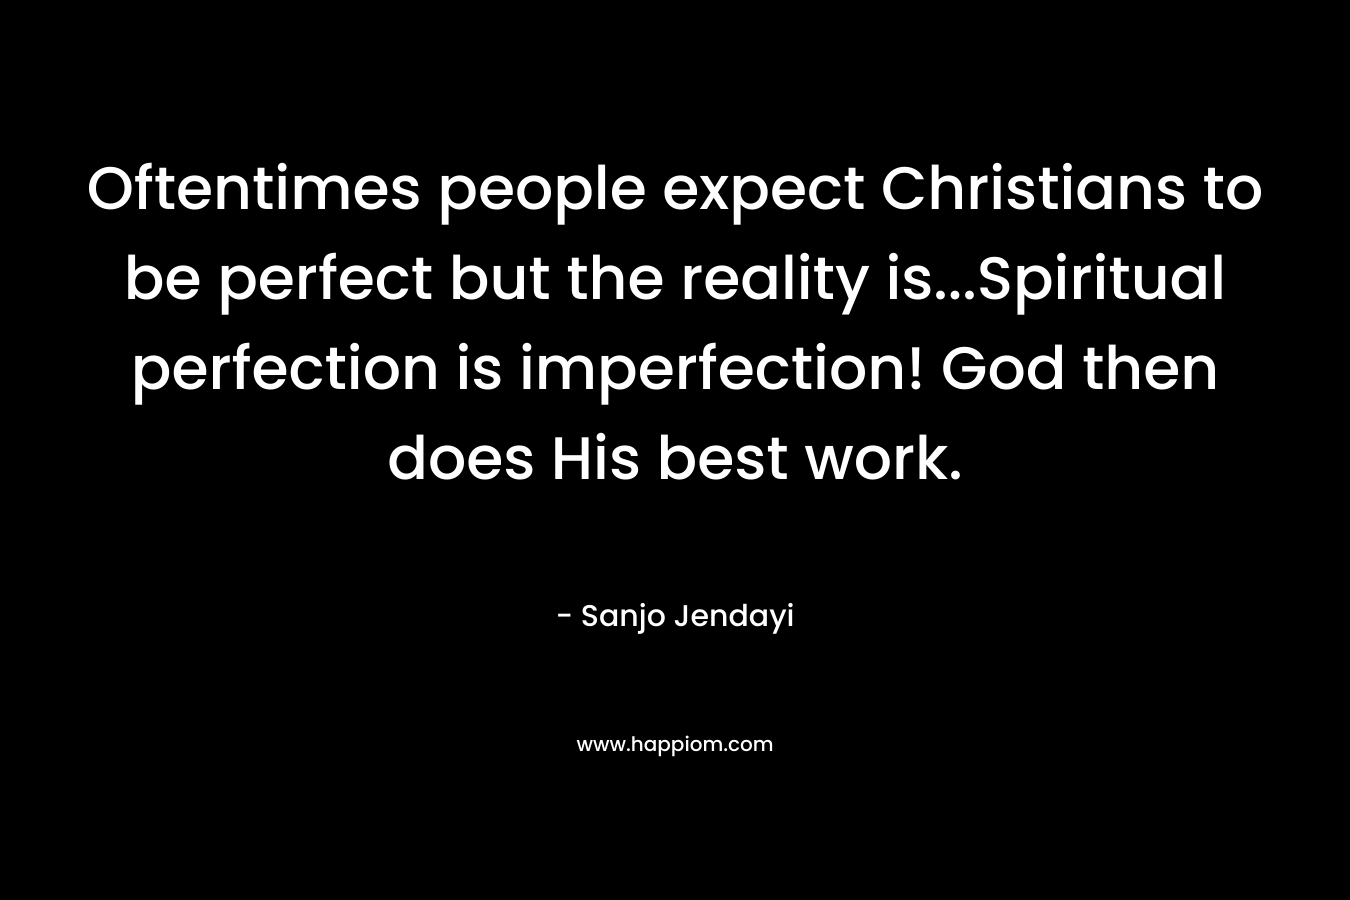 Oftentimes people expect Christians to be perfect but the reality is...Spiritual perfection is imperfection! God then does His best work.